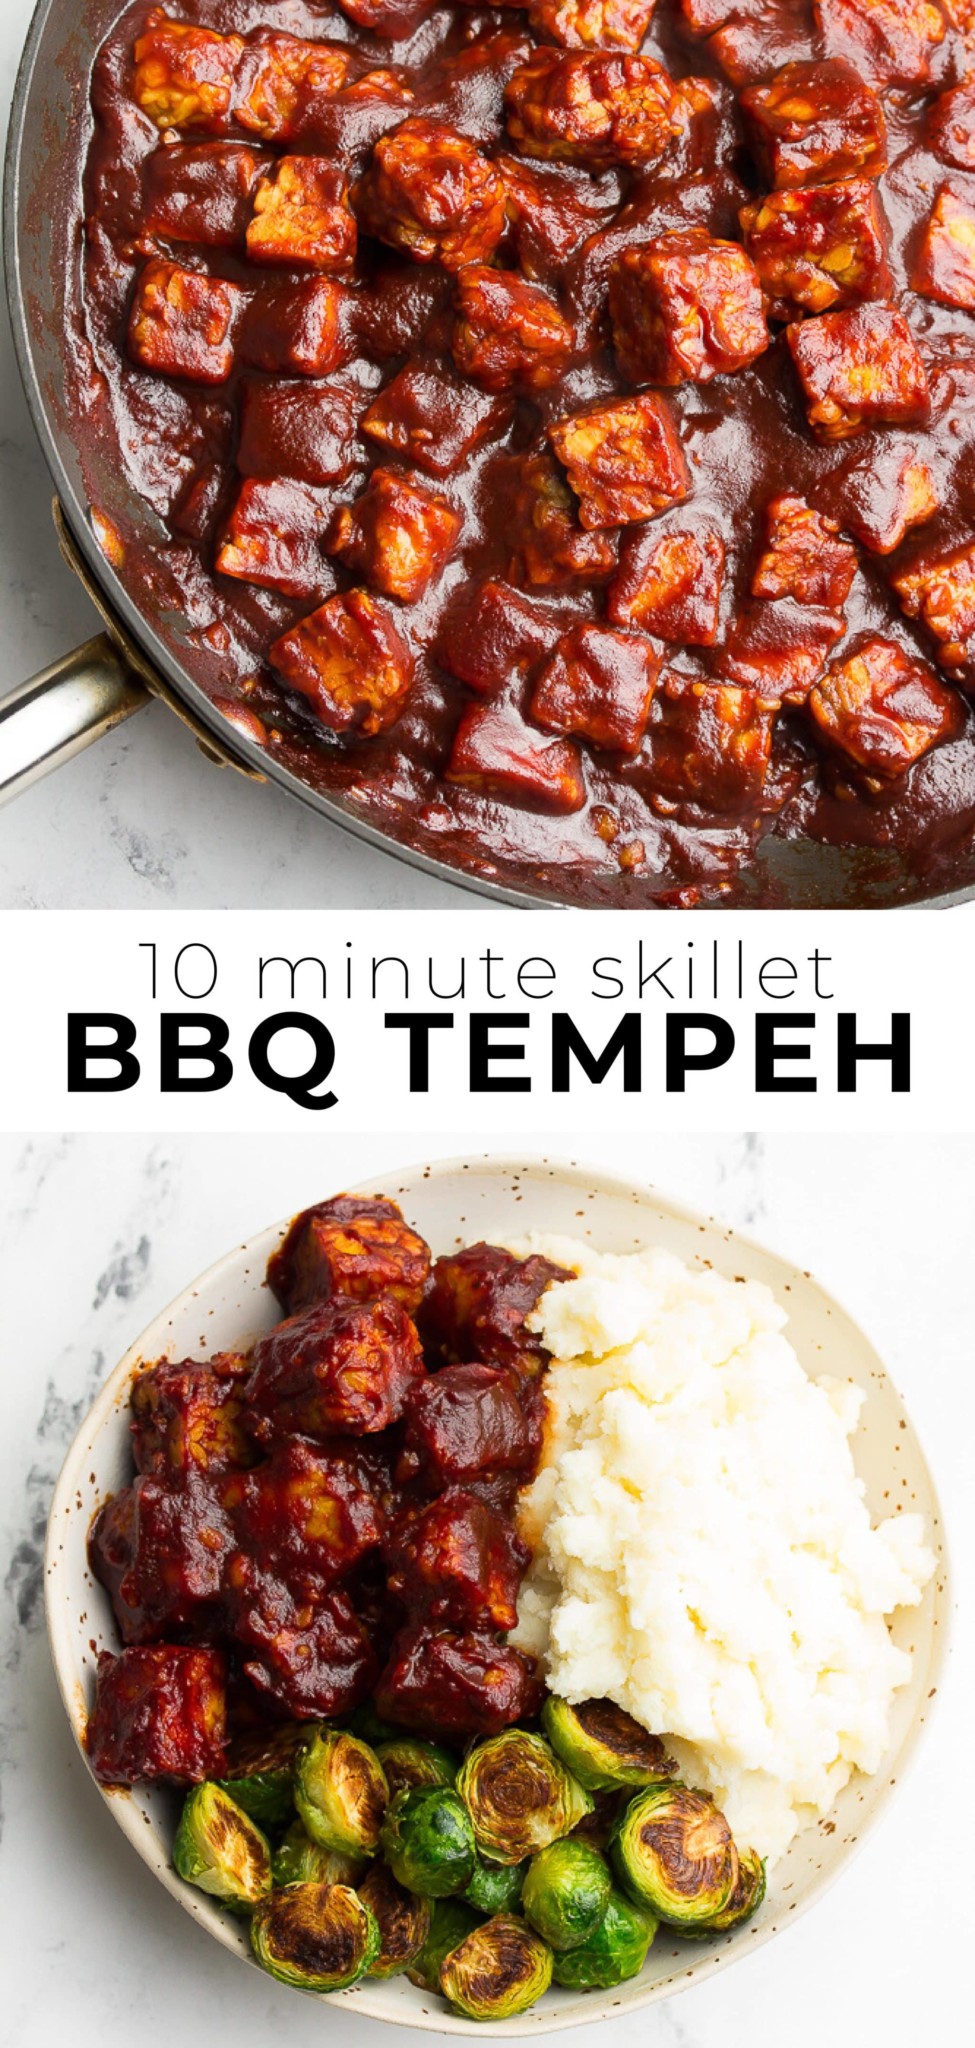 10 Minute Skillet BBQ Tempeh - Nora Cooks